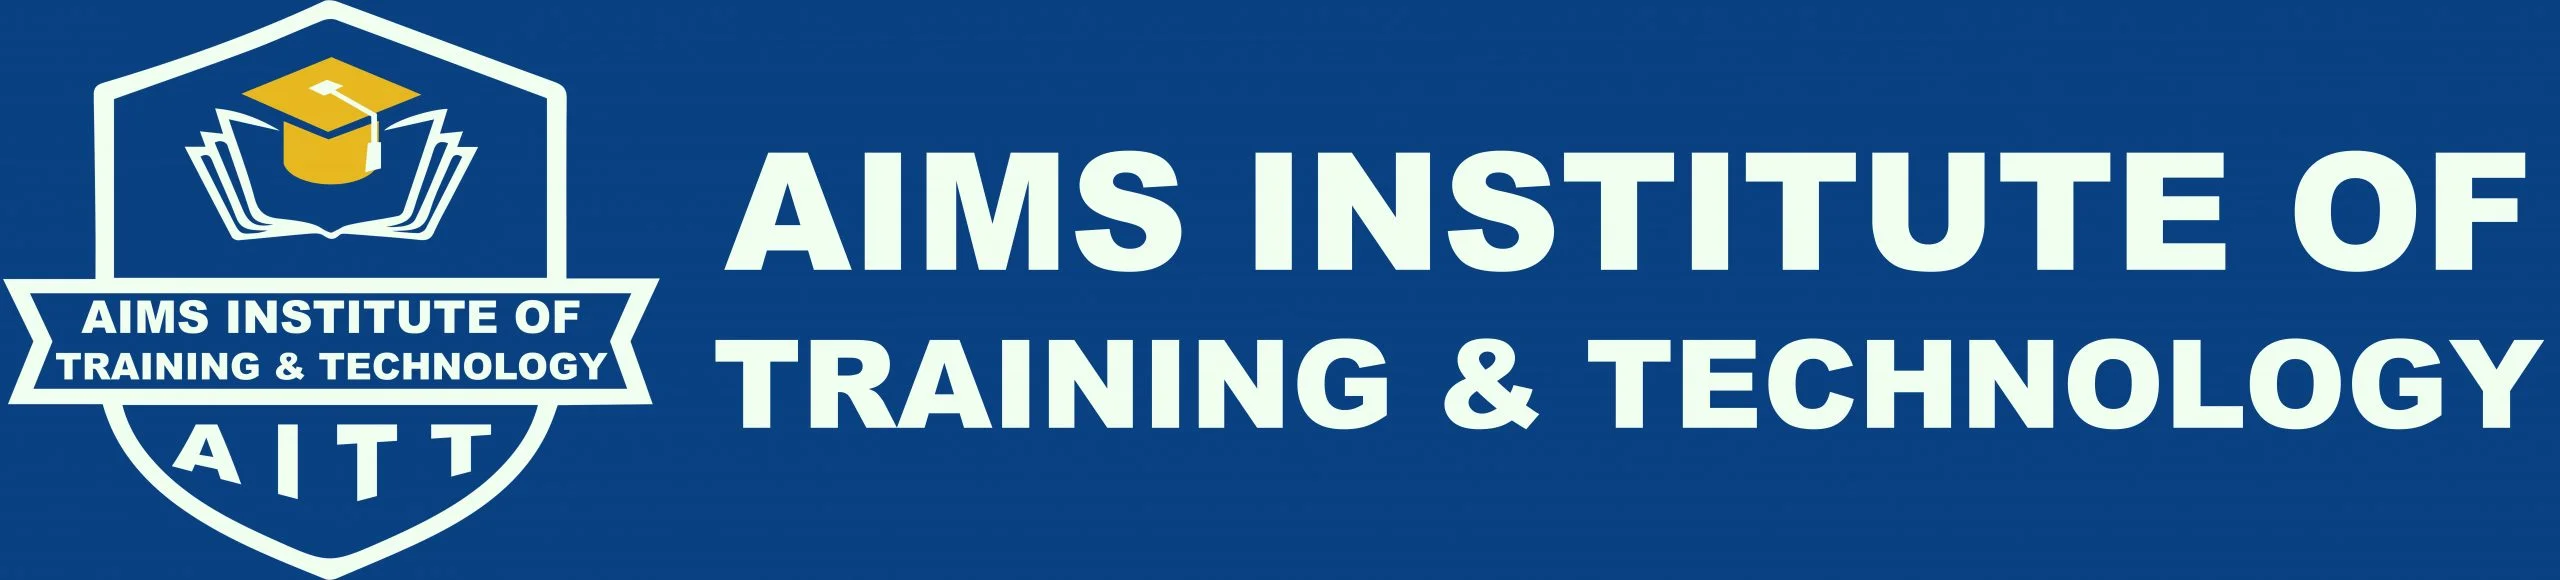 AIMS Institute of Training & Technology